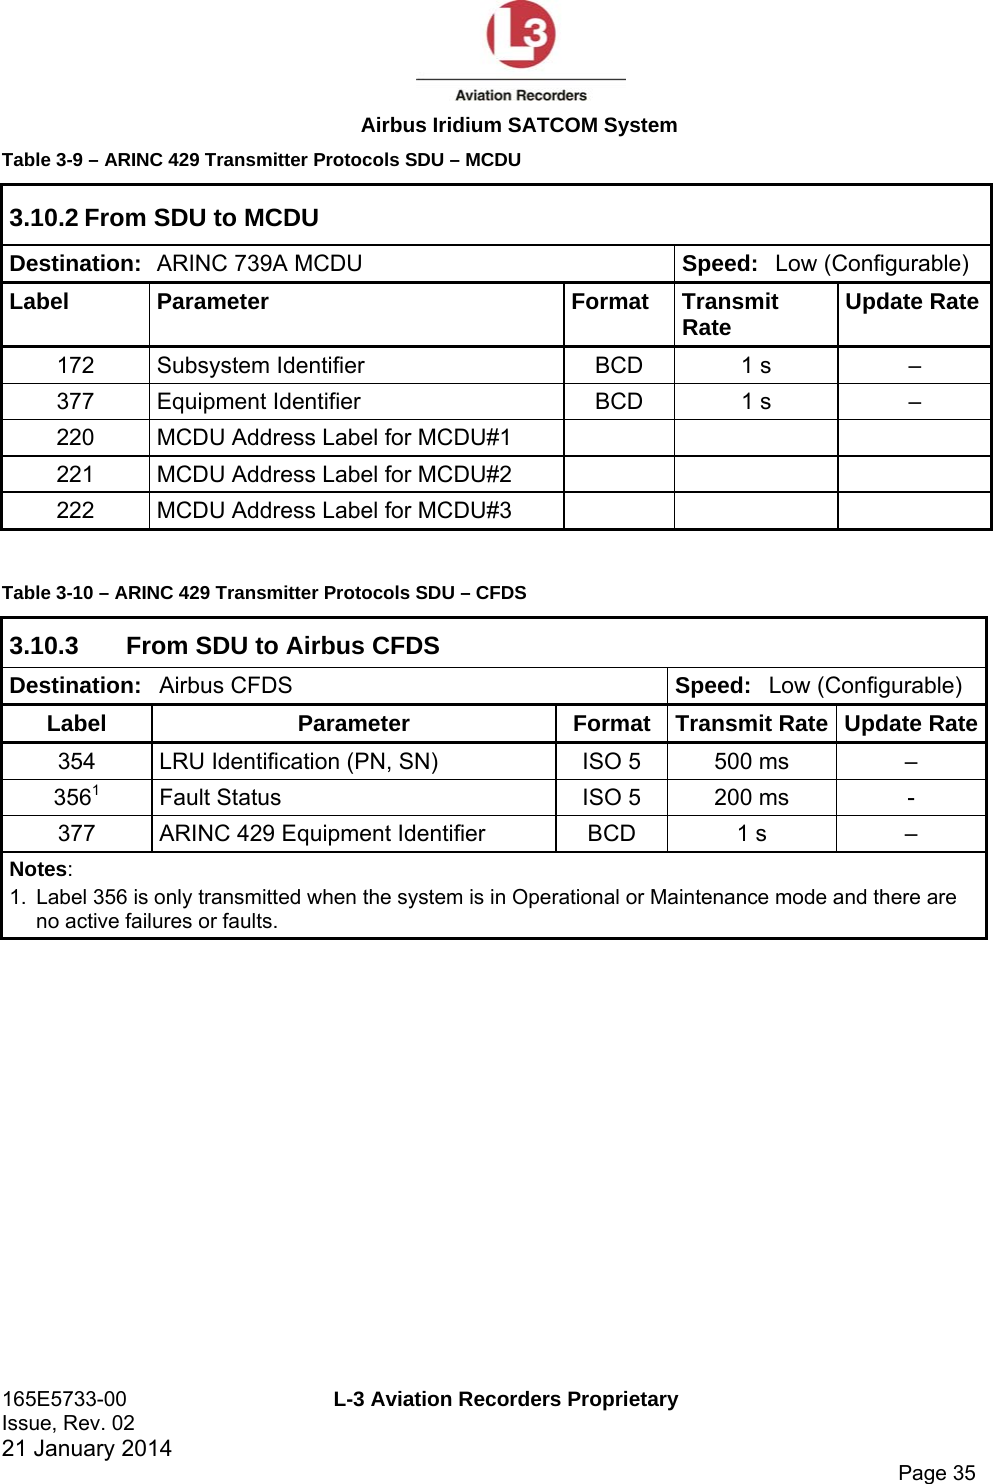  Airbus Iridium SATCOM System 165E5733-00  L-3 Aviation Recorders Proprietary Issue, Rev. 02   21 January 2014      Page 35 Table 3-9 – ARINC 429 Transmitter Protocols SDU – MCDU 3.10.2 From SDU to MCDU Destination:  ARINC 739A MCDU  Speed: Low (Configurable) Label Parameter  Format Transmit Rate  Update Rate172  Subsystem Identifier  BCD  1 s  – 377  Equipment Identifier  BCD  1 s  – 220  MCDU Address Label for MCDU#1       221  MCDU Address Label for MCDU#2       222  MCDU Address Label for MCDU#3        Table 3-10 – ARINC 429 Transmitter Protocols SDU – CFDS 3.10.3       From SDU to Airbus CFDS Destination:  Airbus CFDS  Speed: Low (Configurable) Label  Parameter  Format  Transmit Rate  Update Rate354  LRU Identification (PN, SN)  ISO 5  500 ms  – 3561  Fault Status  ISO 5  200 ms  - 377  ARINC 429 Equipment Identifier  BCD  1 s  – Notes: 1.  Label 356 is only transmitted when the system is in Operational or Maintenance mode and there are no active failures or faults.   